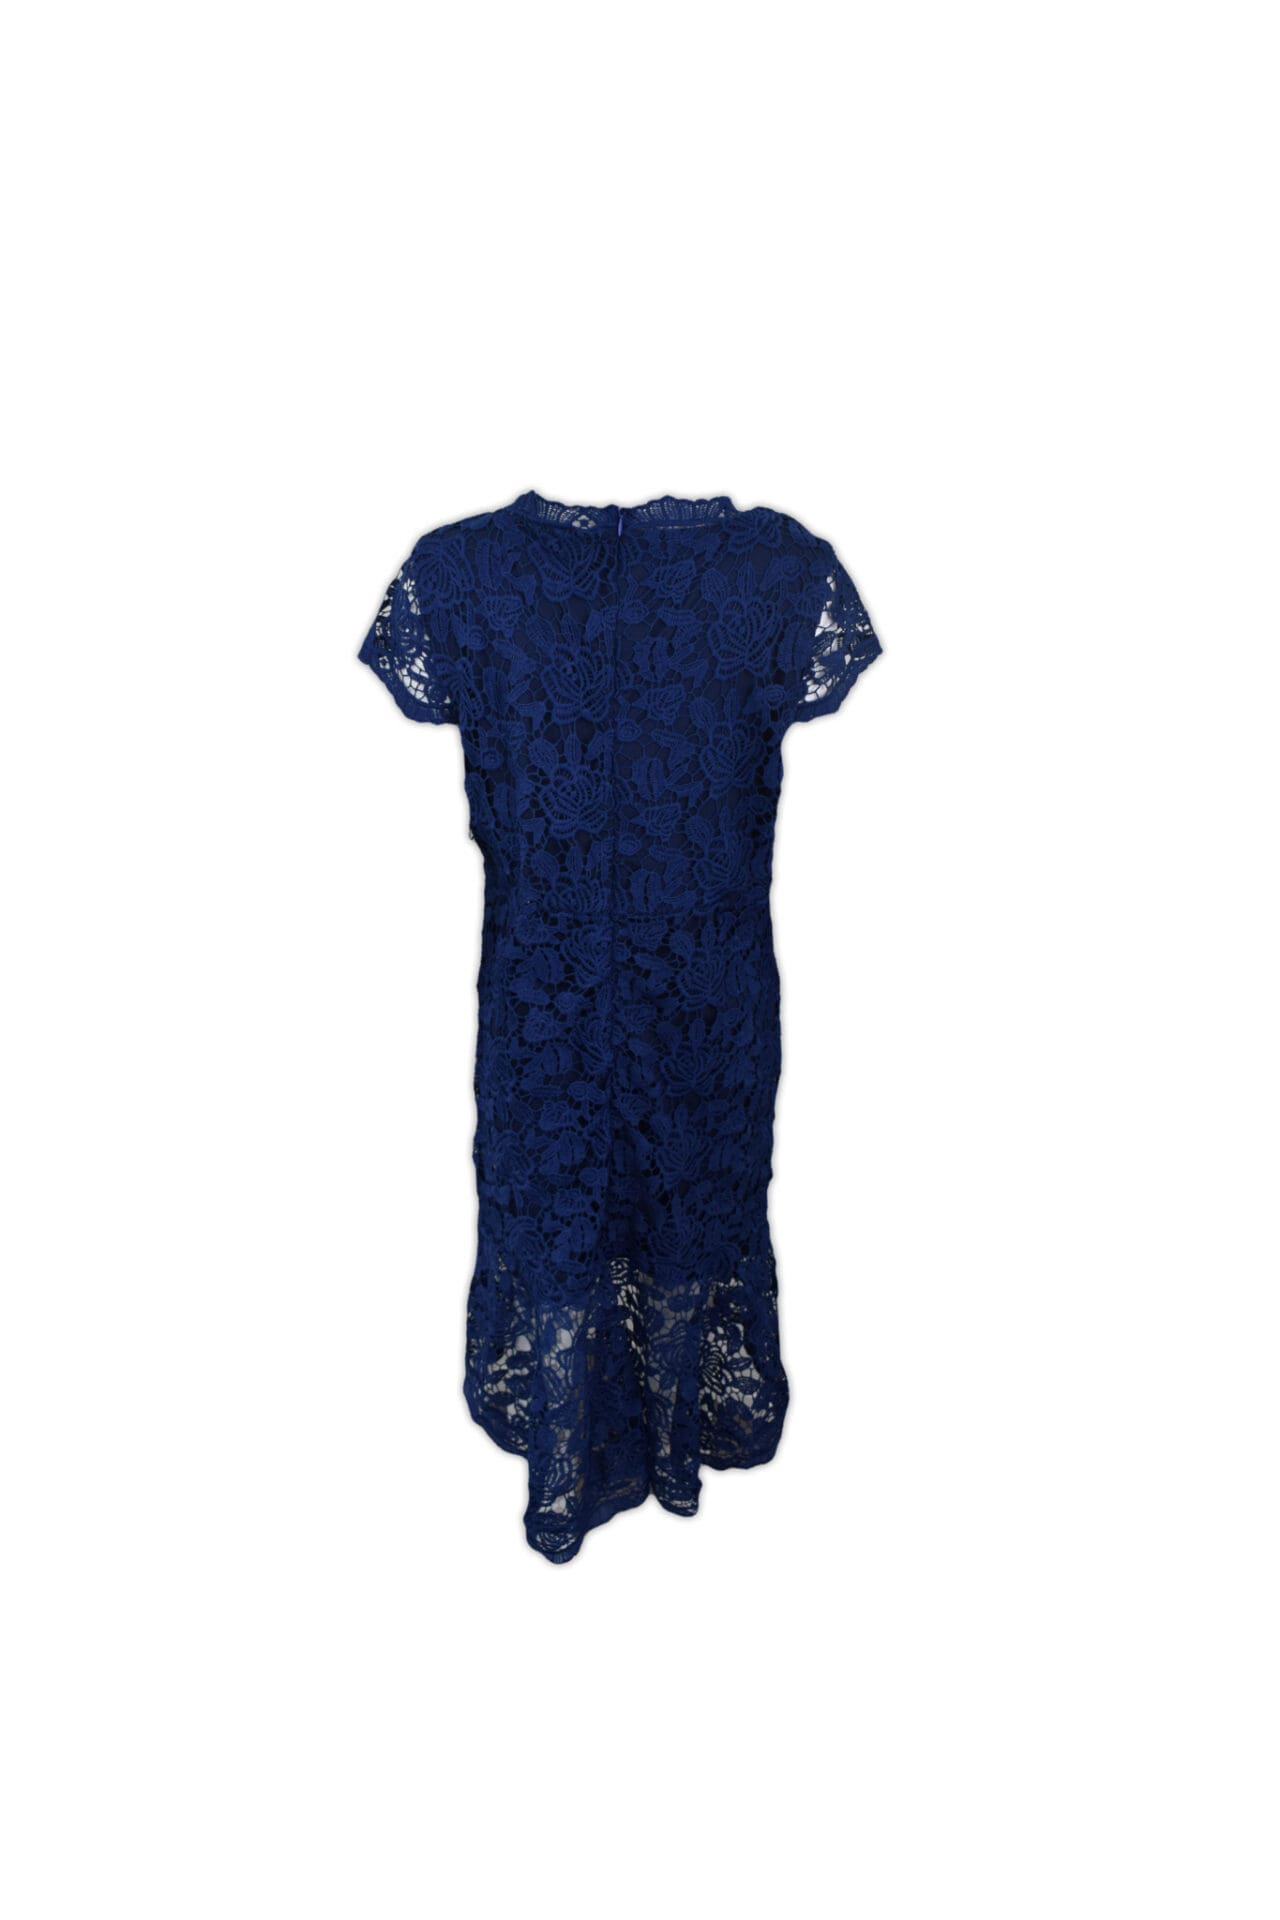 Large, navy lace, formal dress with scalloped edges and a v-neck.